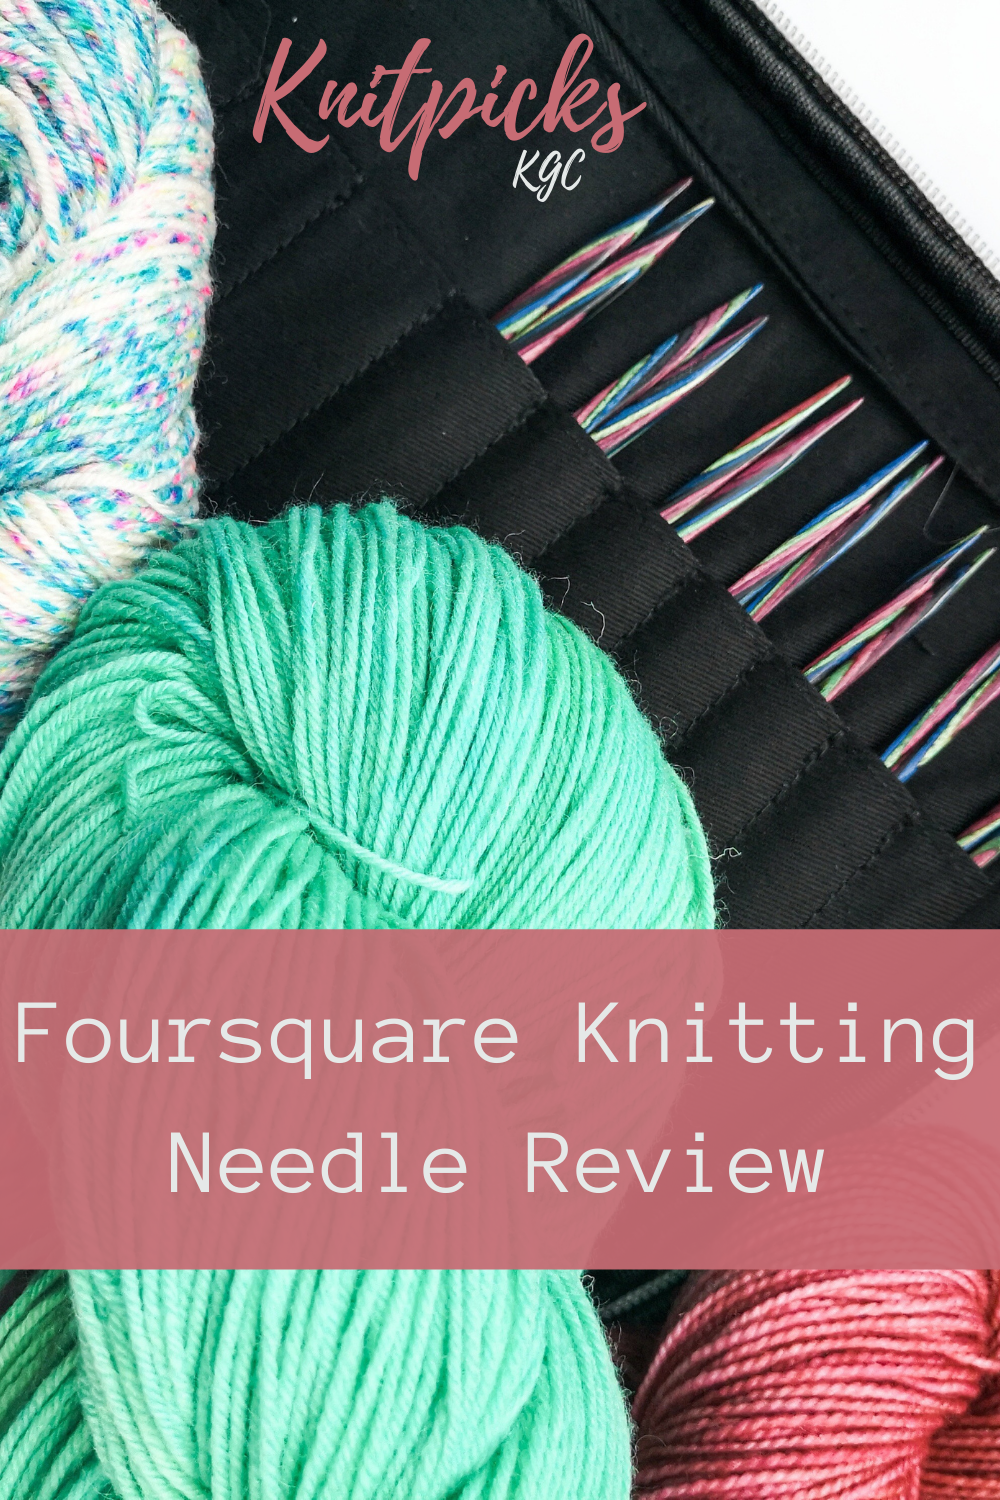 Product Review: Foursquare interchangeable knitting needles by Knitpicks —  Knotty Gurl Crochet